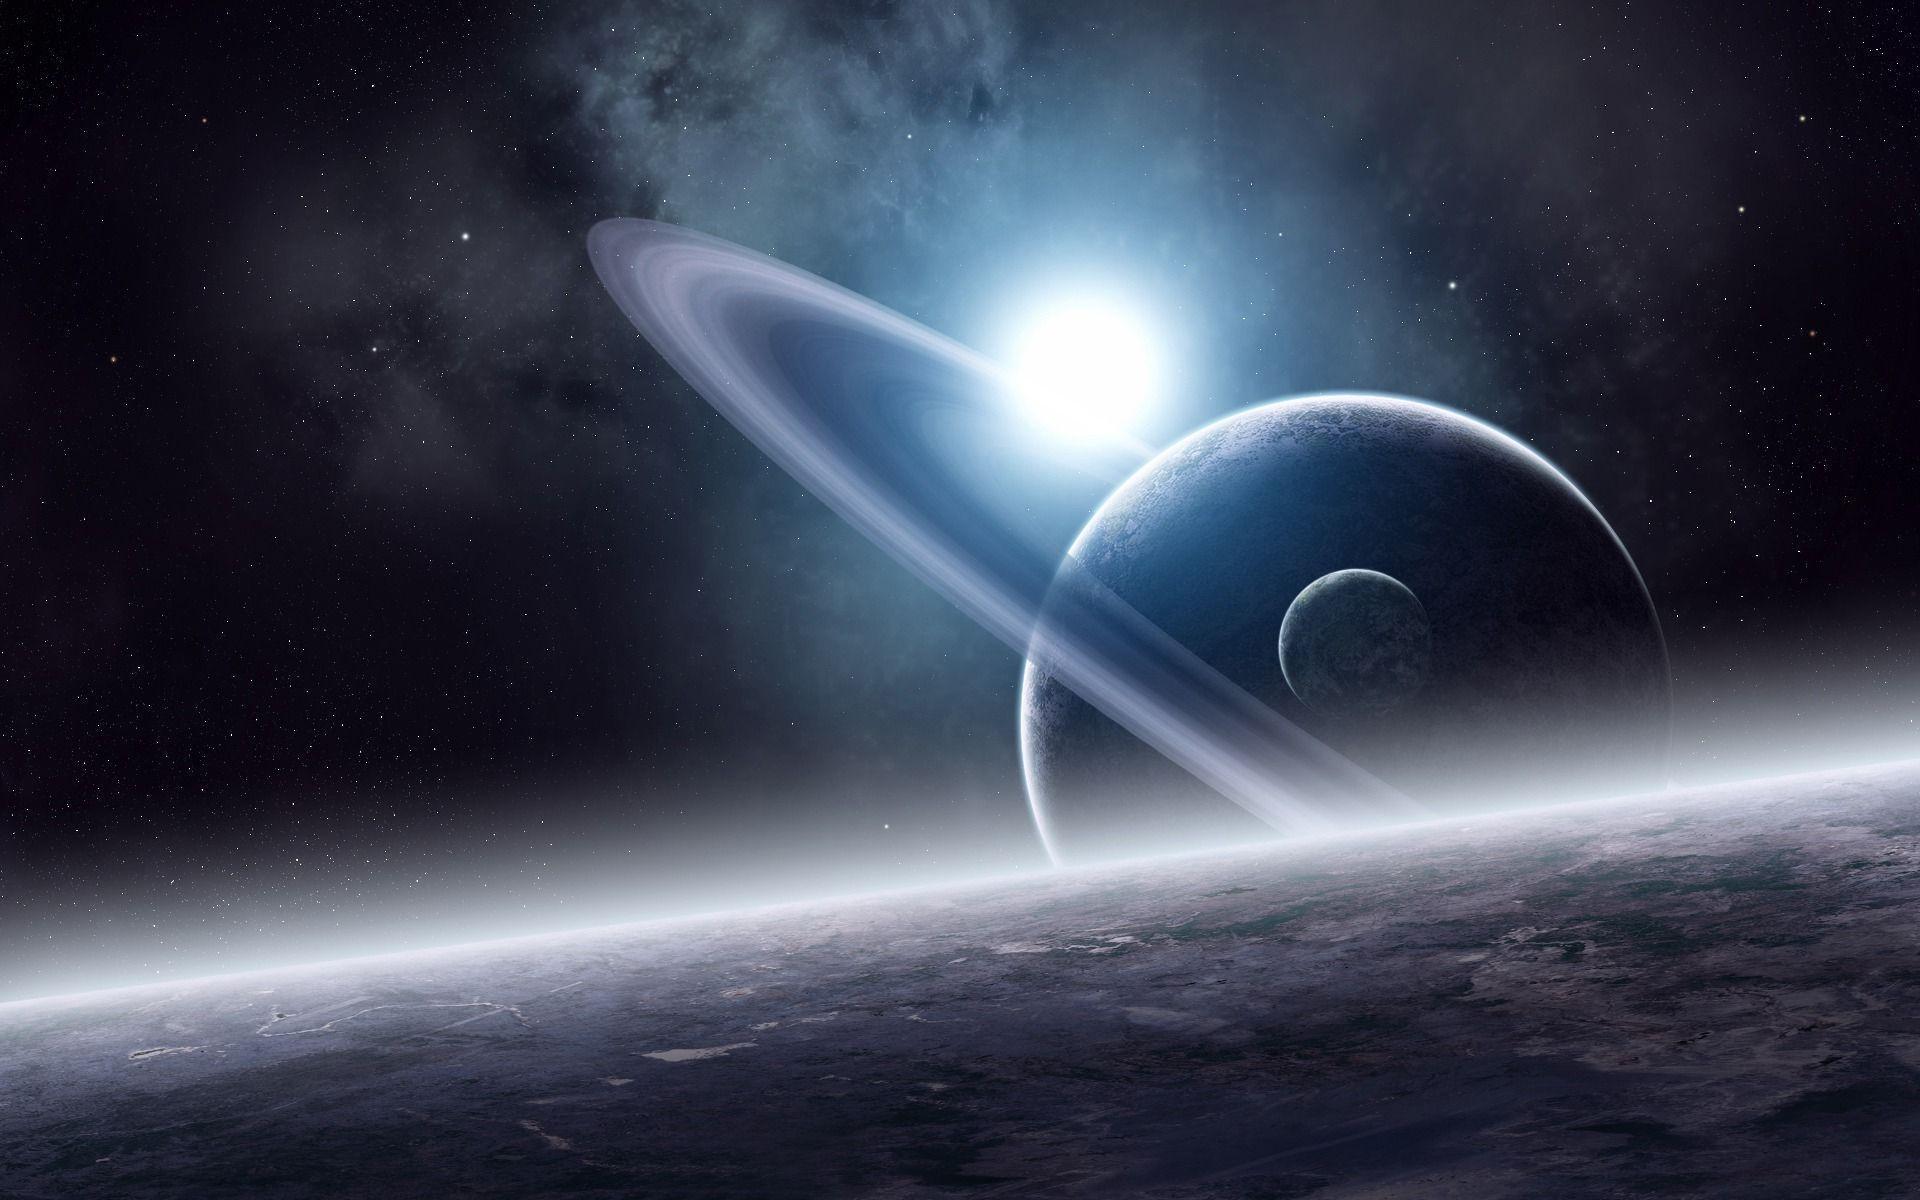 Amazing Saturn Wallpaper - Space Pictures With Planets And Stars - HD Wallpaper 